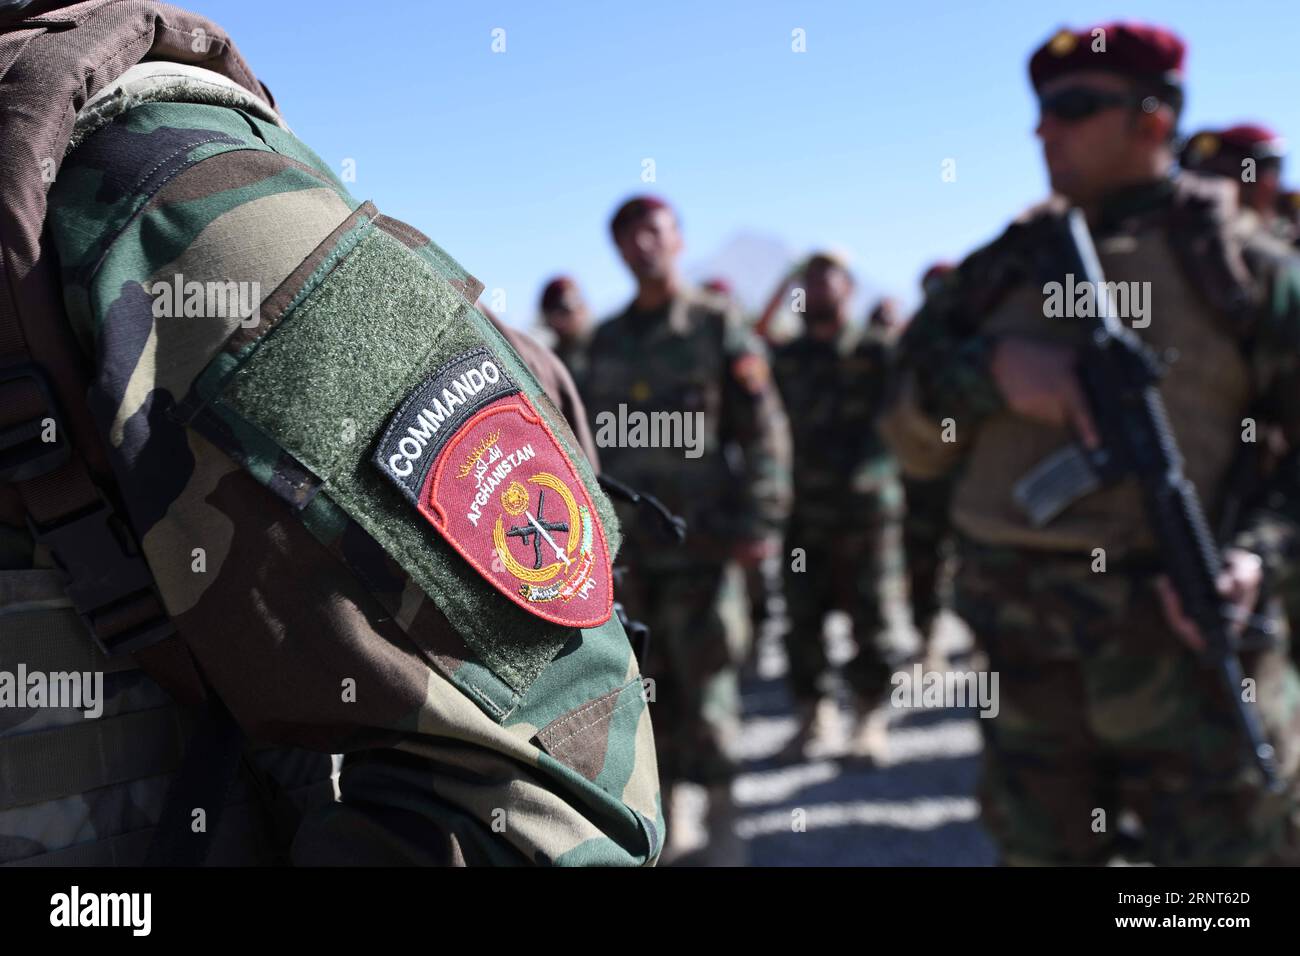 (171031) -- KABUL, Oct. 31, 2017 -- A commando soldier waits to receive an inspection at Morehead Commando Training Center, near Kabul, Afghanistan, on Oct. 25, 2017. A total of 830 commandos after completion of a 14-week training course were commissioned to Afghan National Army (ANA) recently. ) (psw) AFGHANISTAN-KABUL-MOREHEAD COMMANDO TRAINING CENTER DaixHe PUBLICATIONxNOTxINxCHN Stock Photo